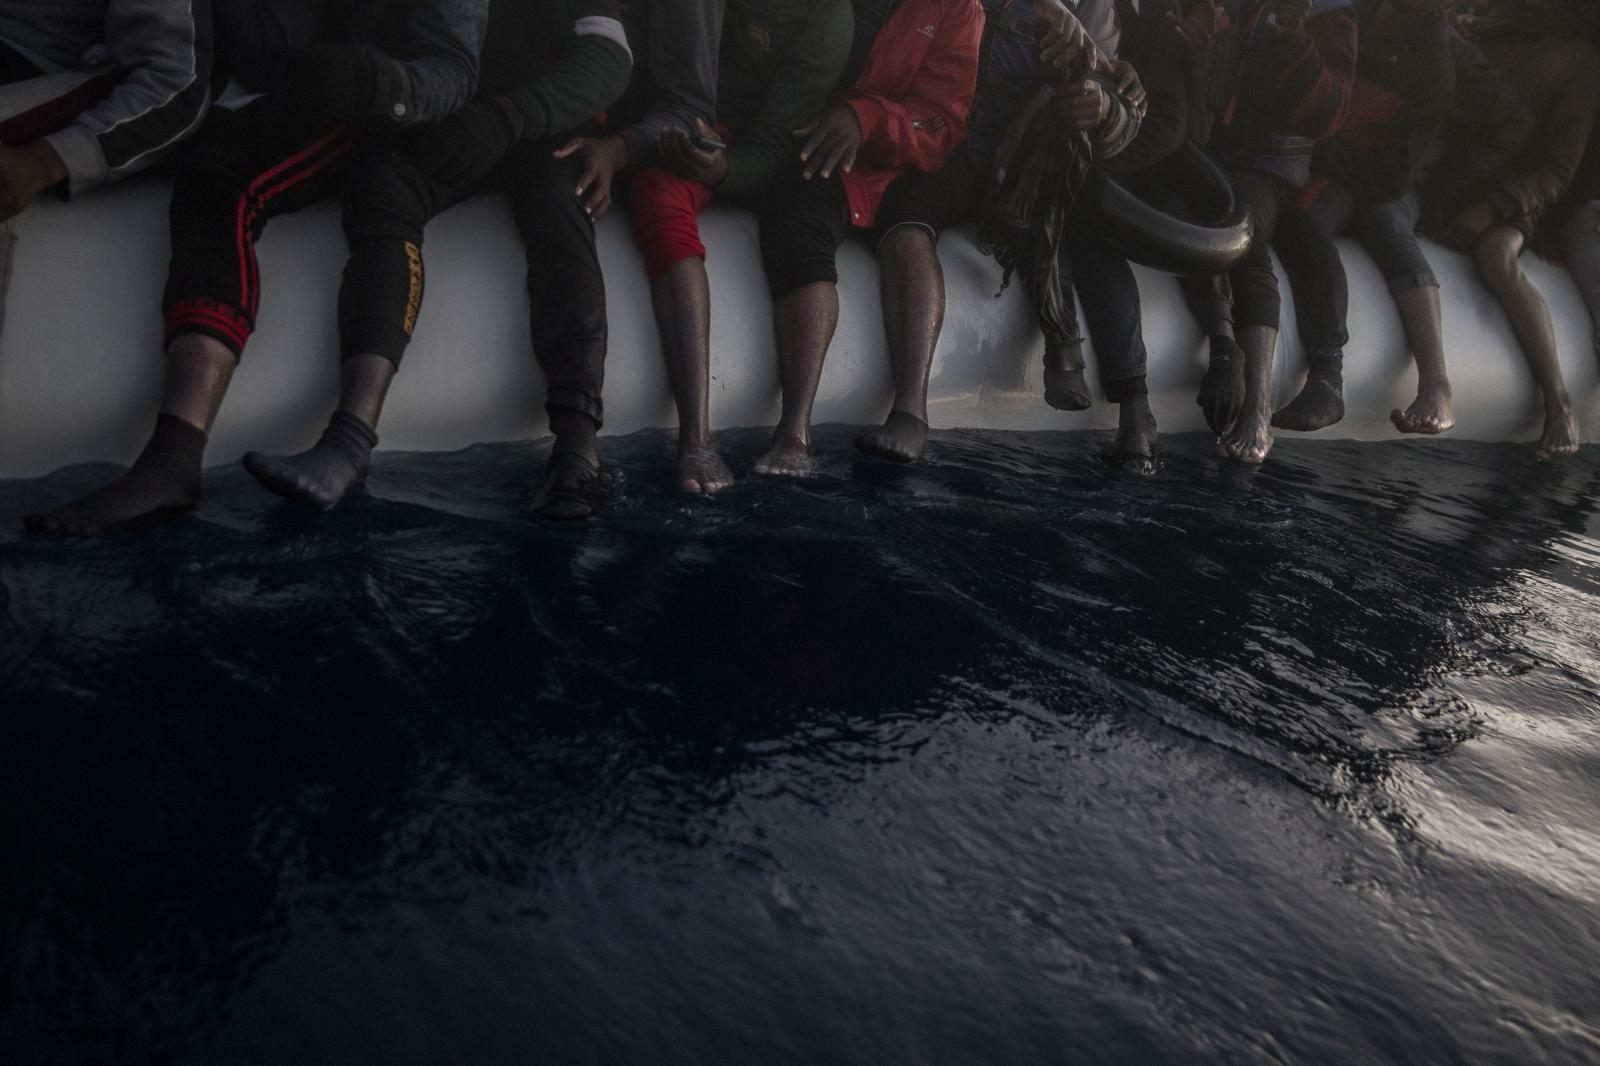 Fleeing the Libyan Clutches - Migrants and refugees are seen barefoot in a rubber boat....